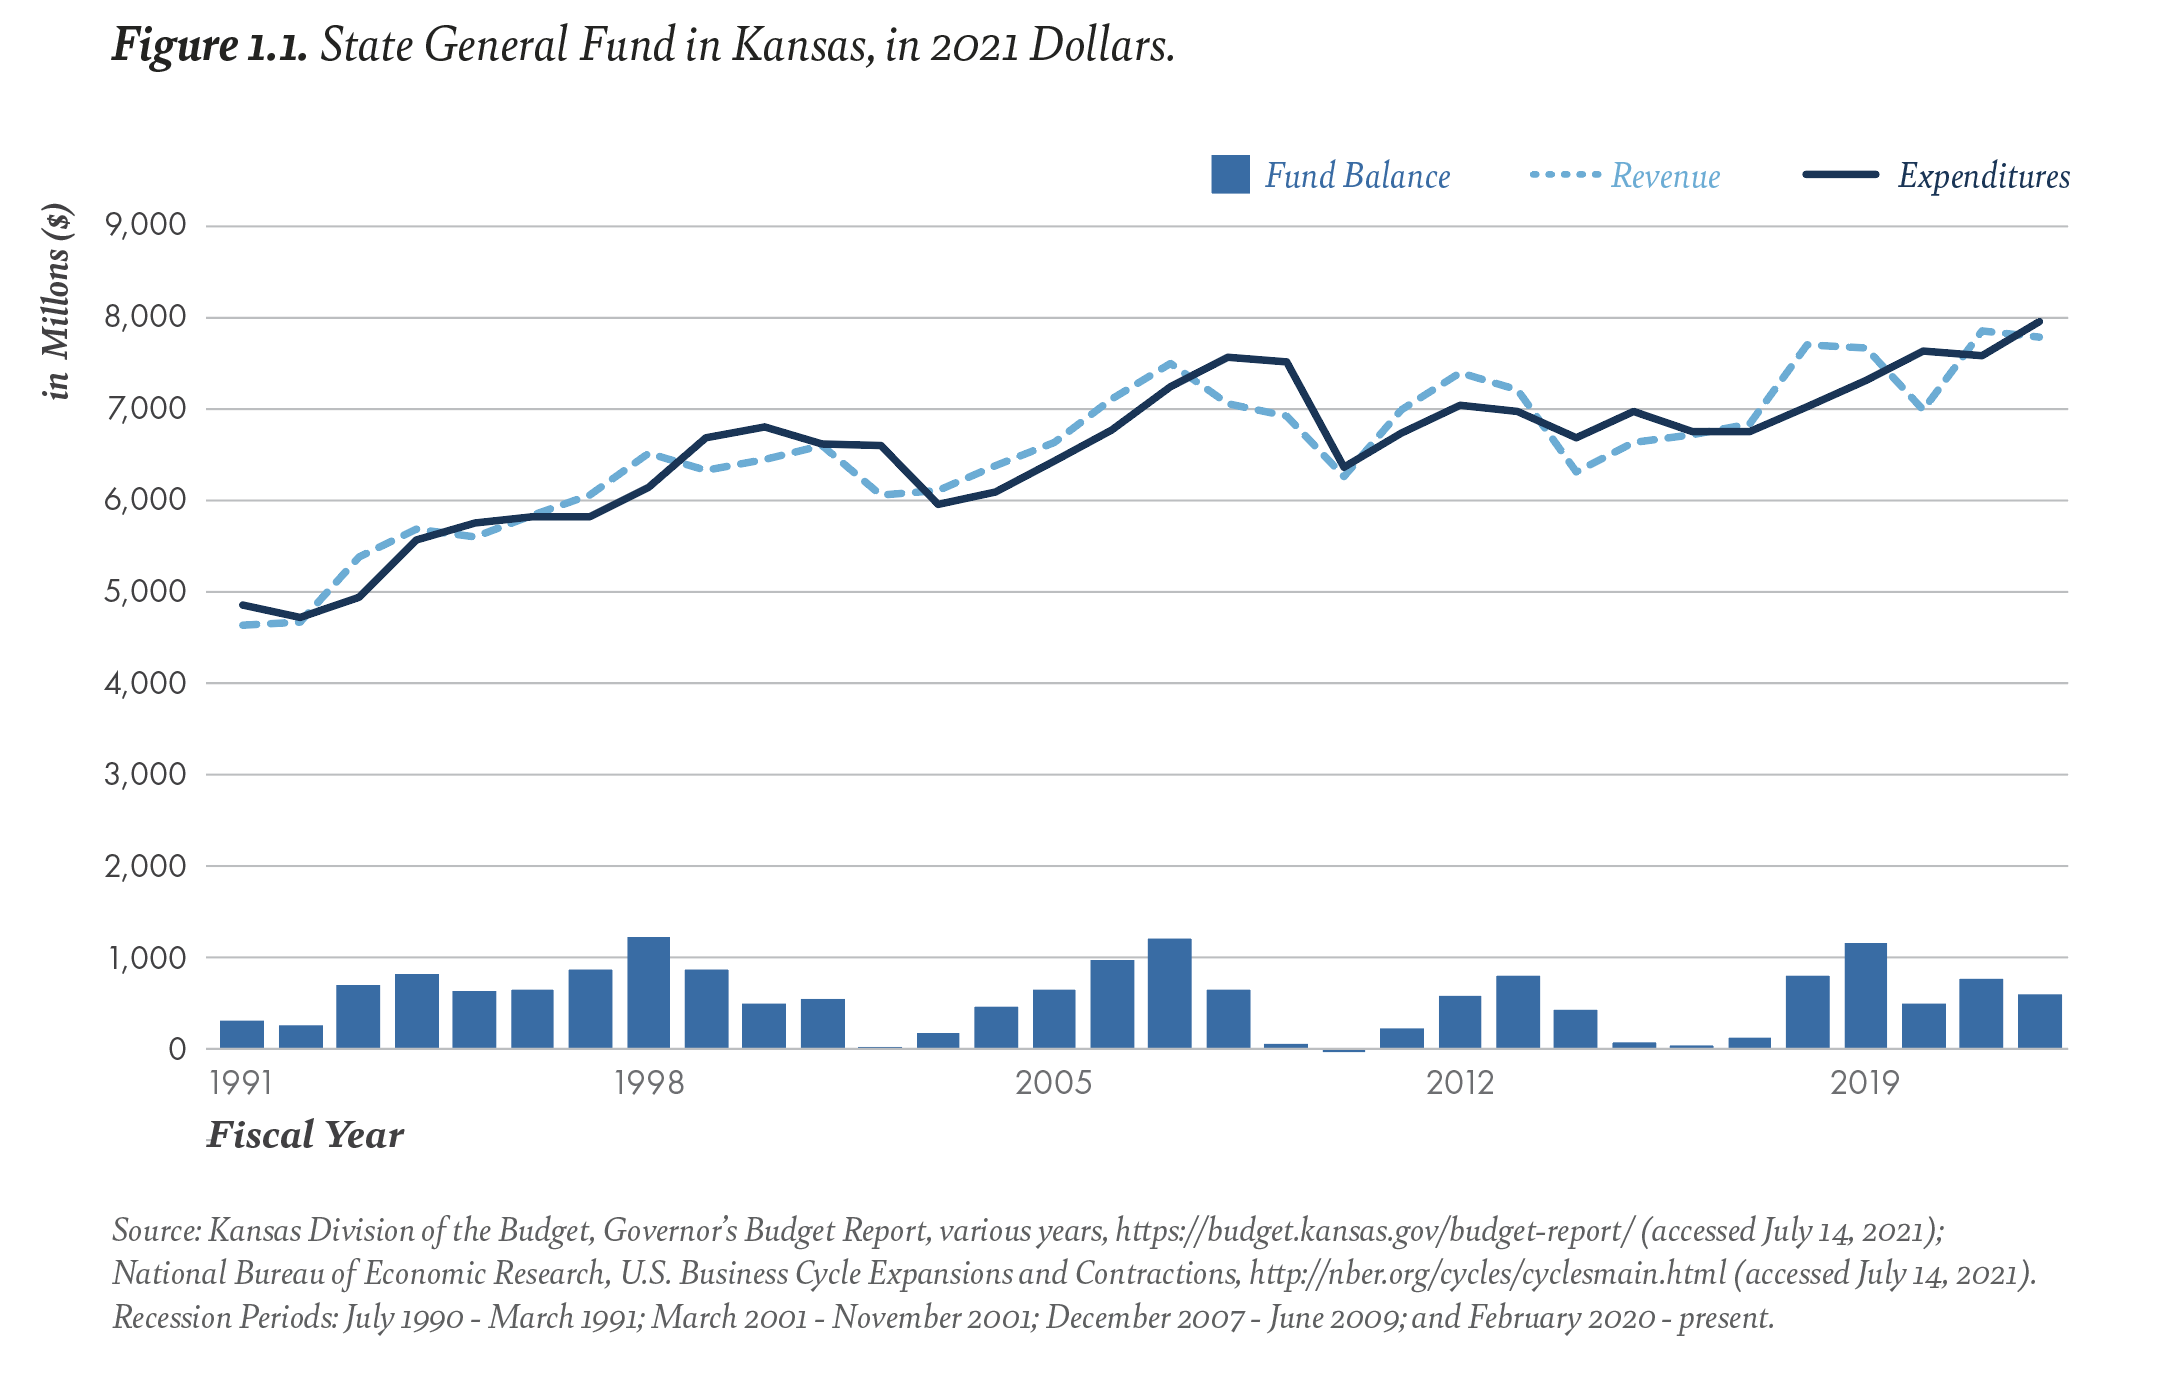 A time-series graph showing revenue, fund balance, and expenditures in Kansas from 1991 to 2019.